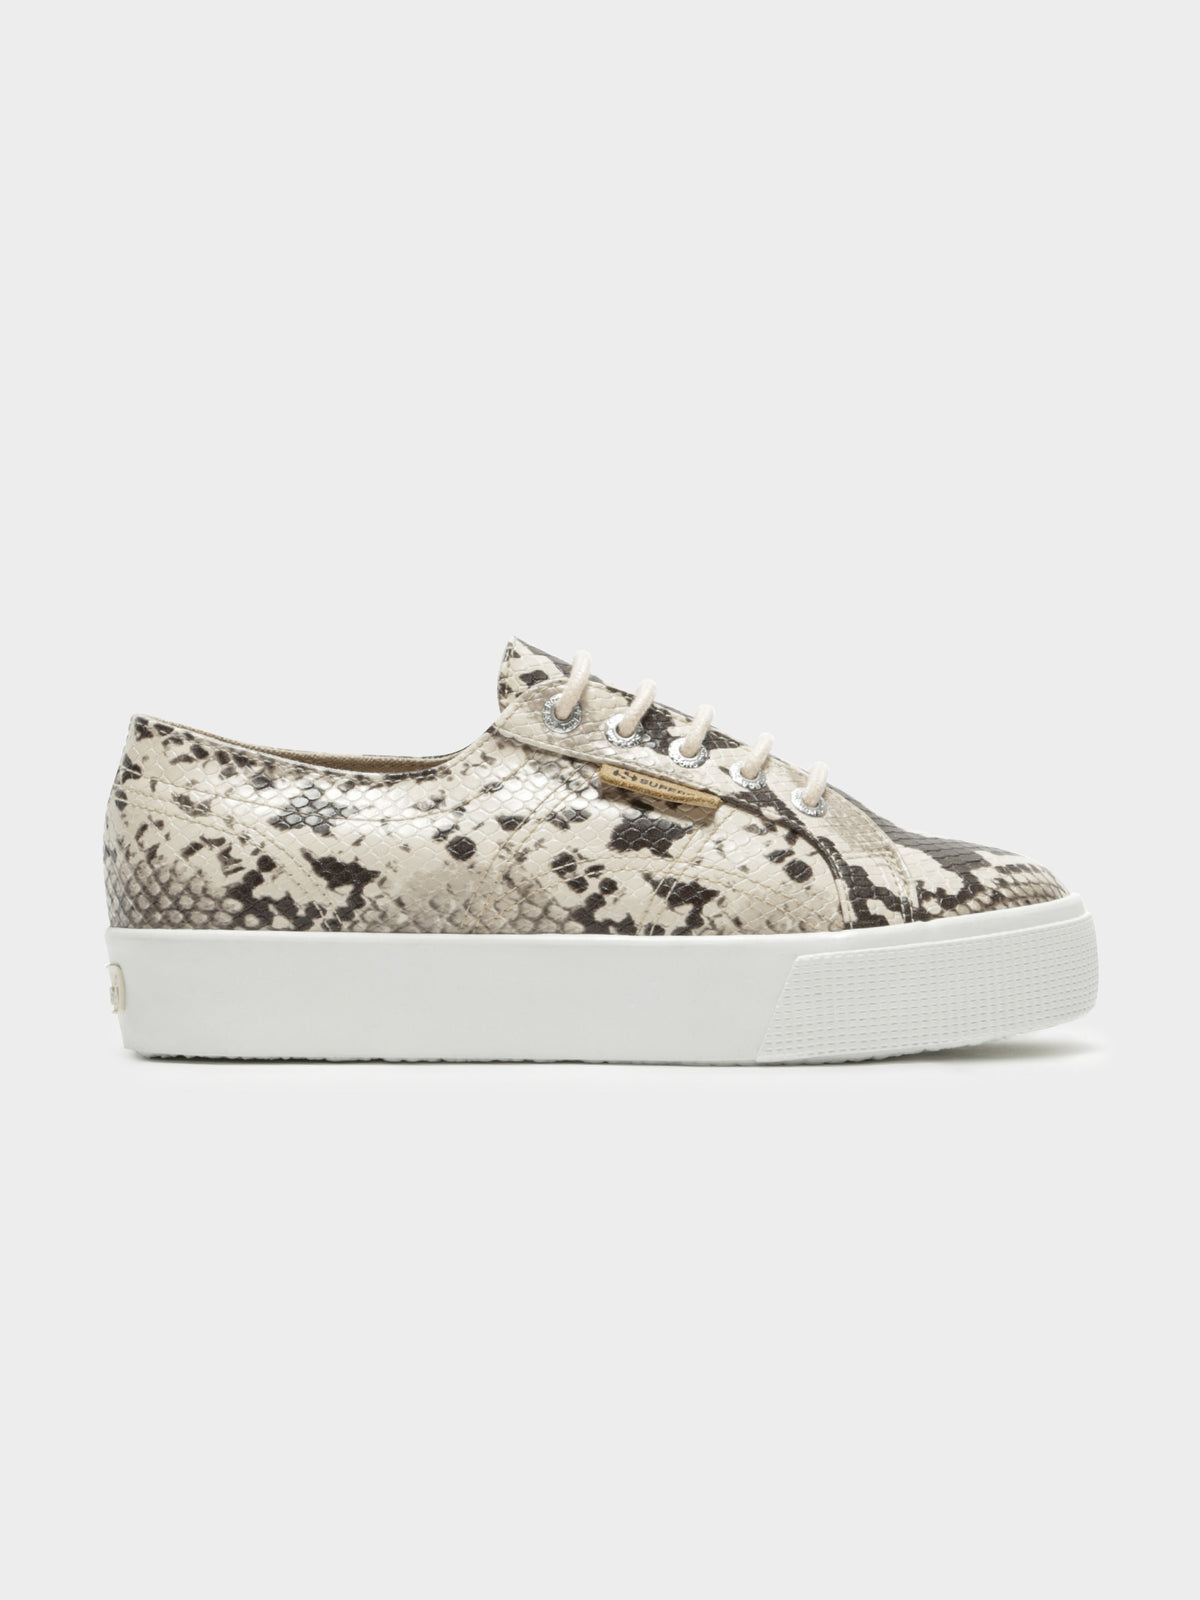 2730 Synthetic Snakeskin Sneakers in Taupe Black